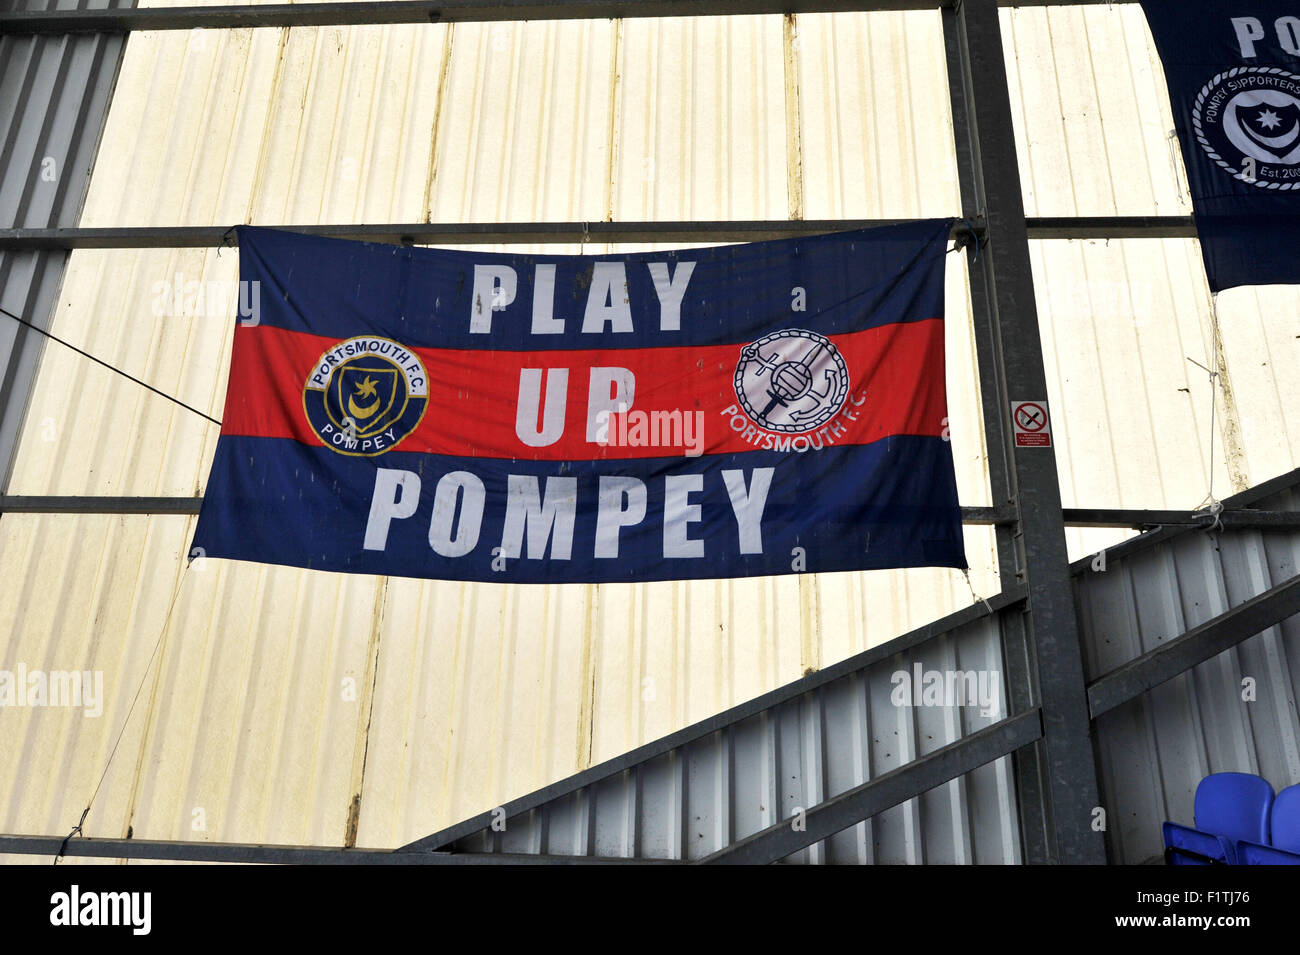 Portsmouth Hampshire UK - Fratton Park Football Ground with Play Up Pompey flag banner - Editorial use only. No merchandising. For Football images FA and Premier League restrictions apply inc. no internet/mobile usage without FAPL license - for details contact Football Dataco Stock Photo